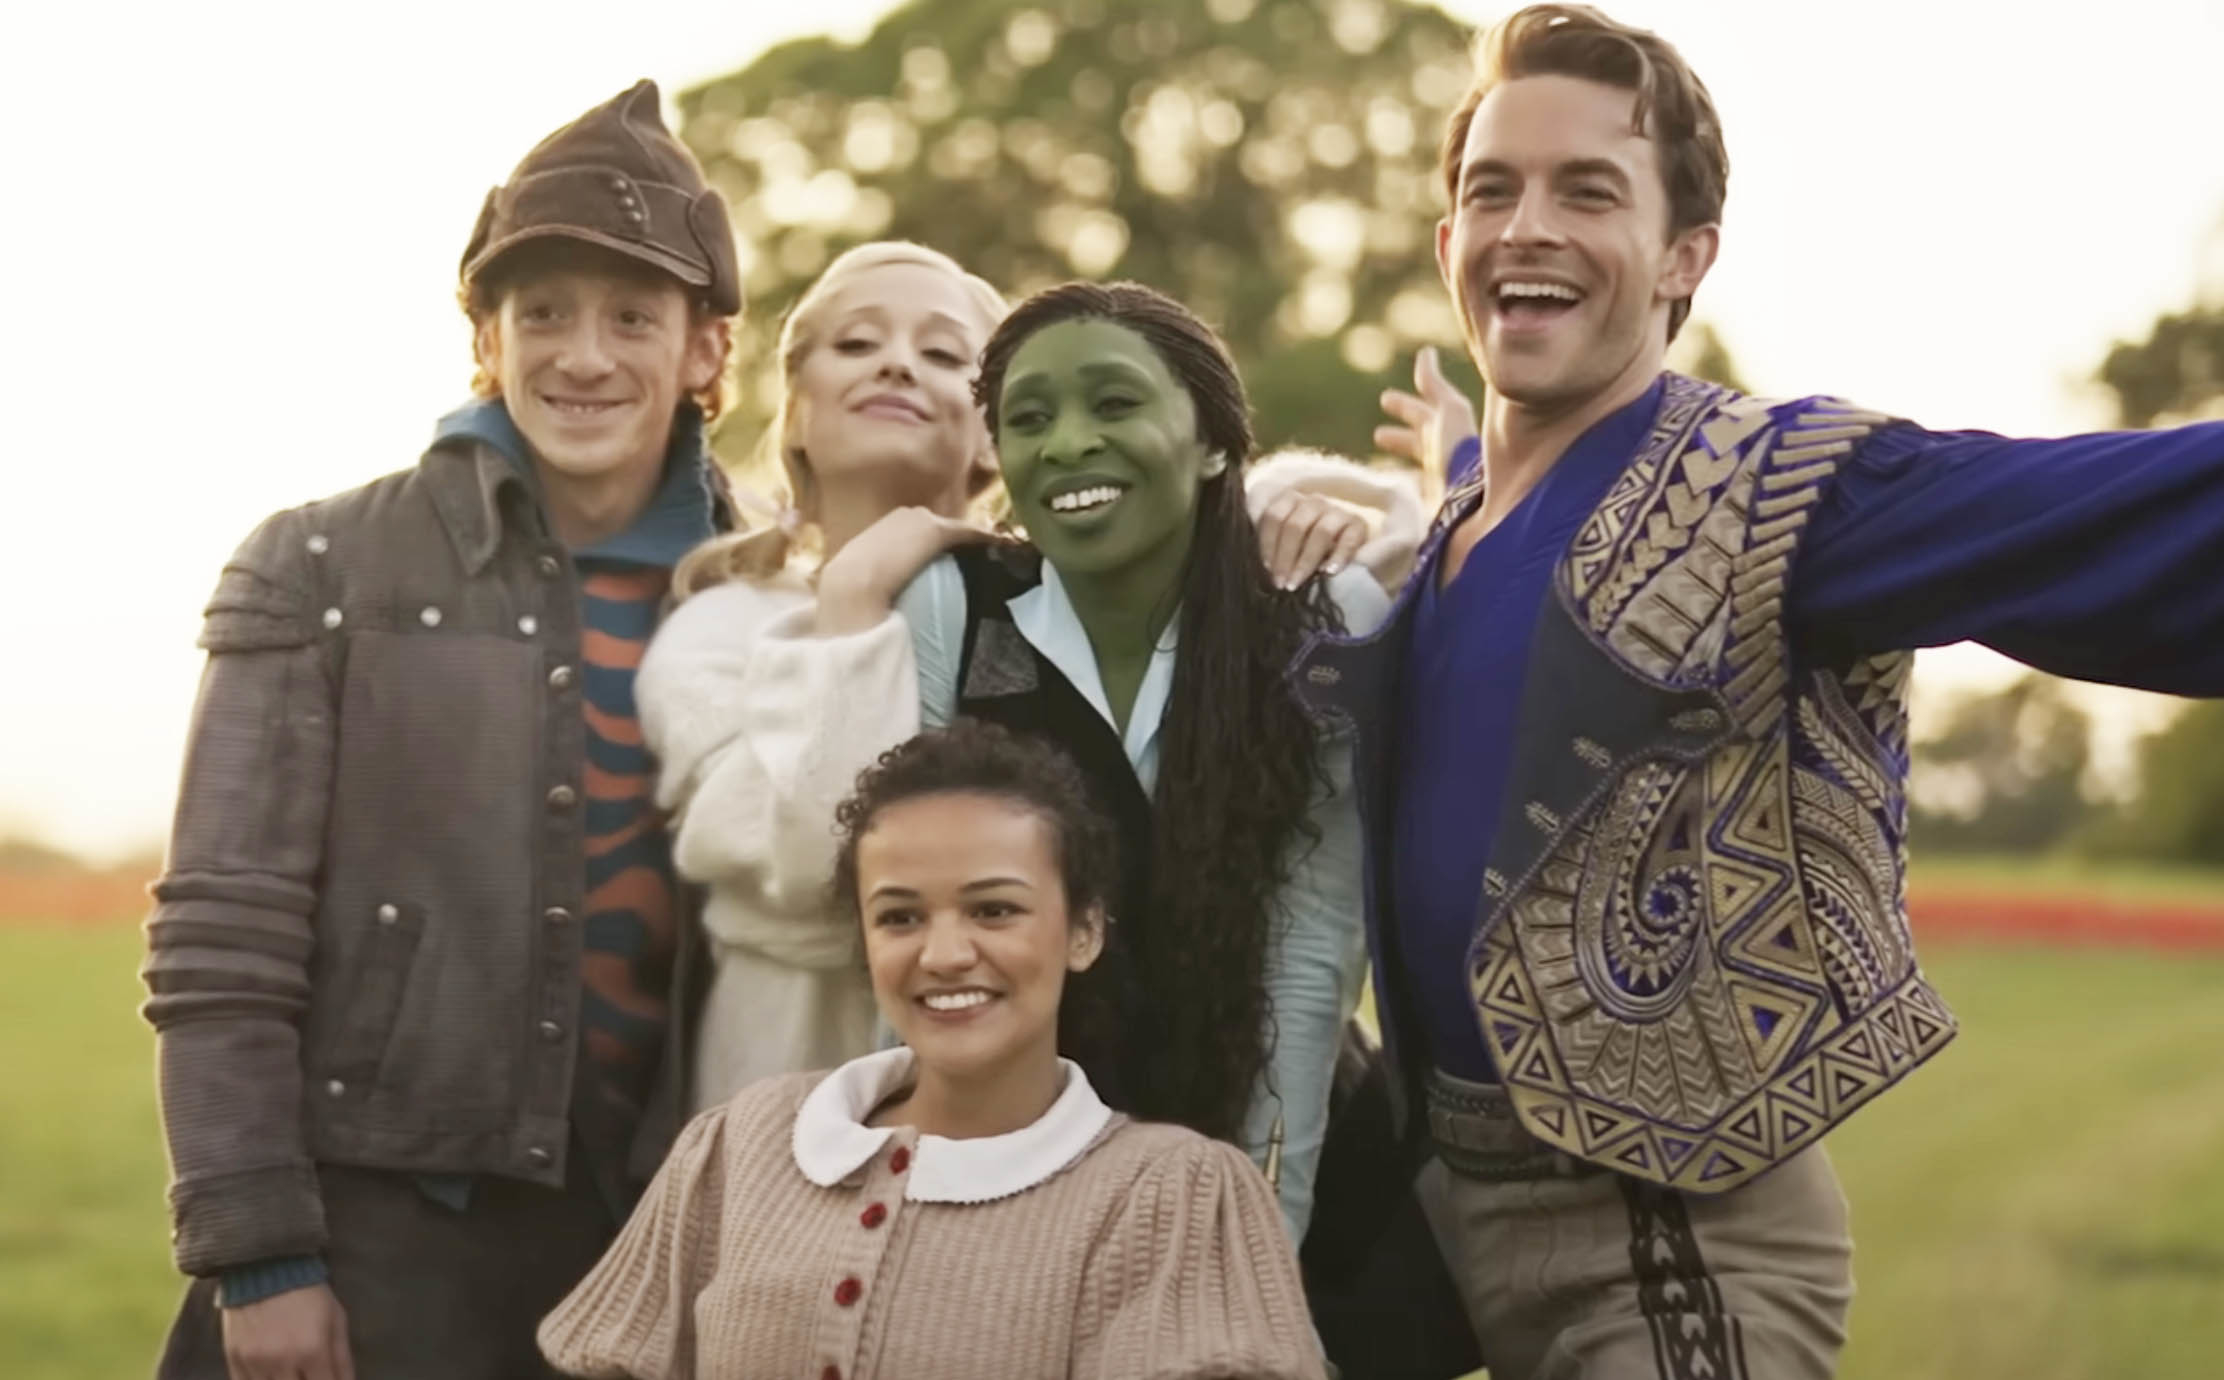 Ethan Slater, Ariana Grande, Cynthia Erivo, Jonathan Bailey, and Marissa Bode in costume for the film &quot;Wicked&quot;